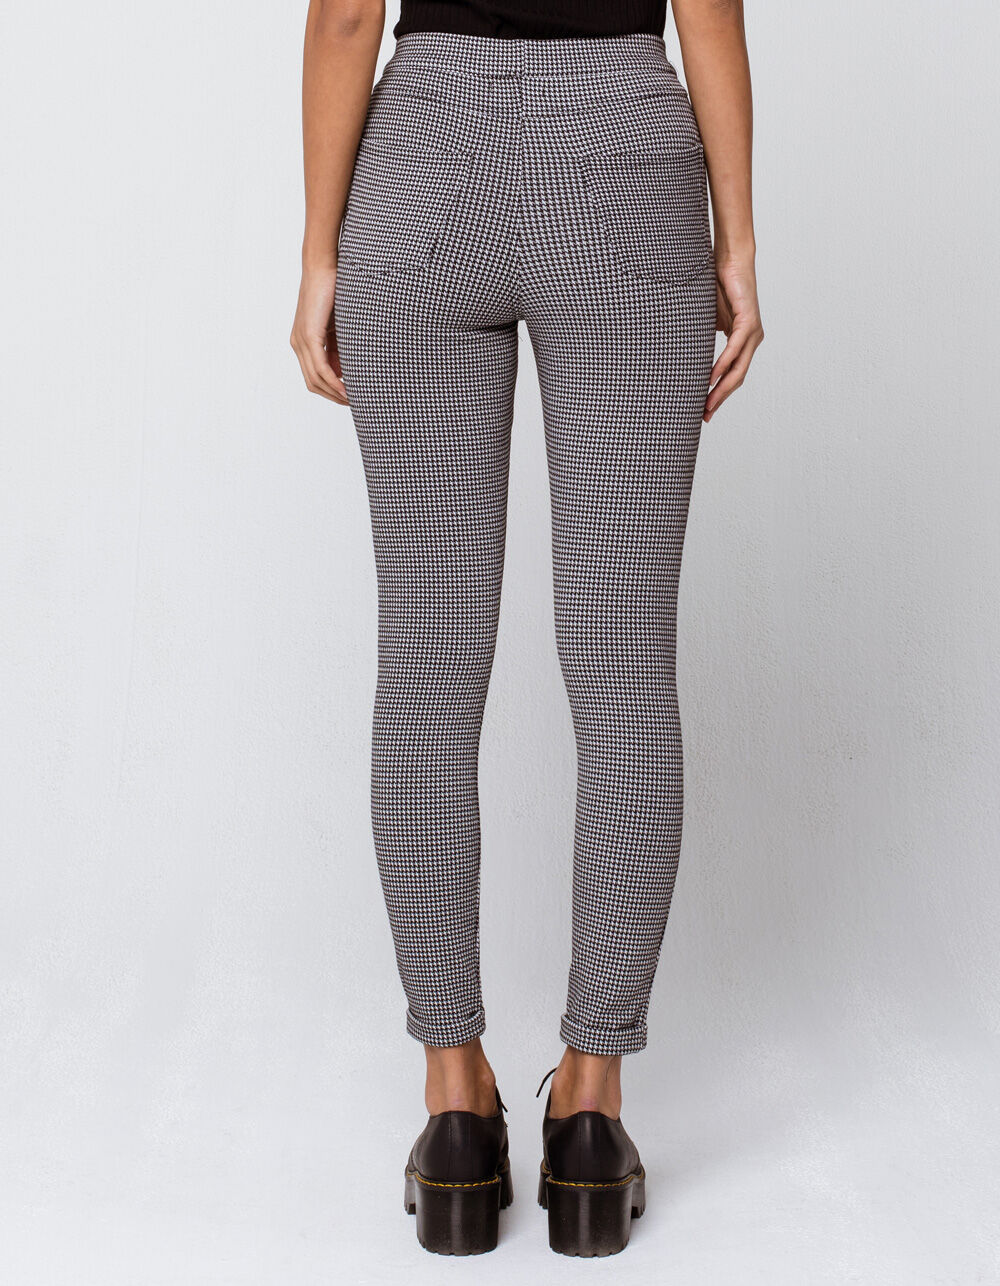 IVY & MAIN Houndstooth Womens Skinny Pants image number 3